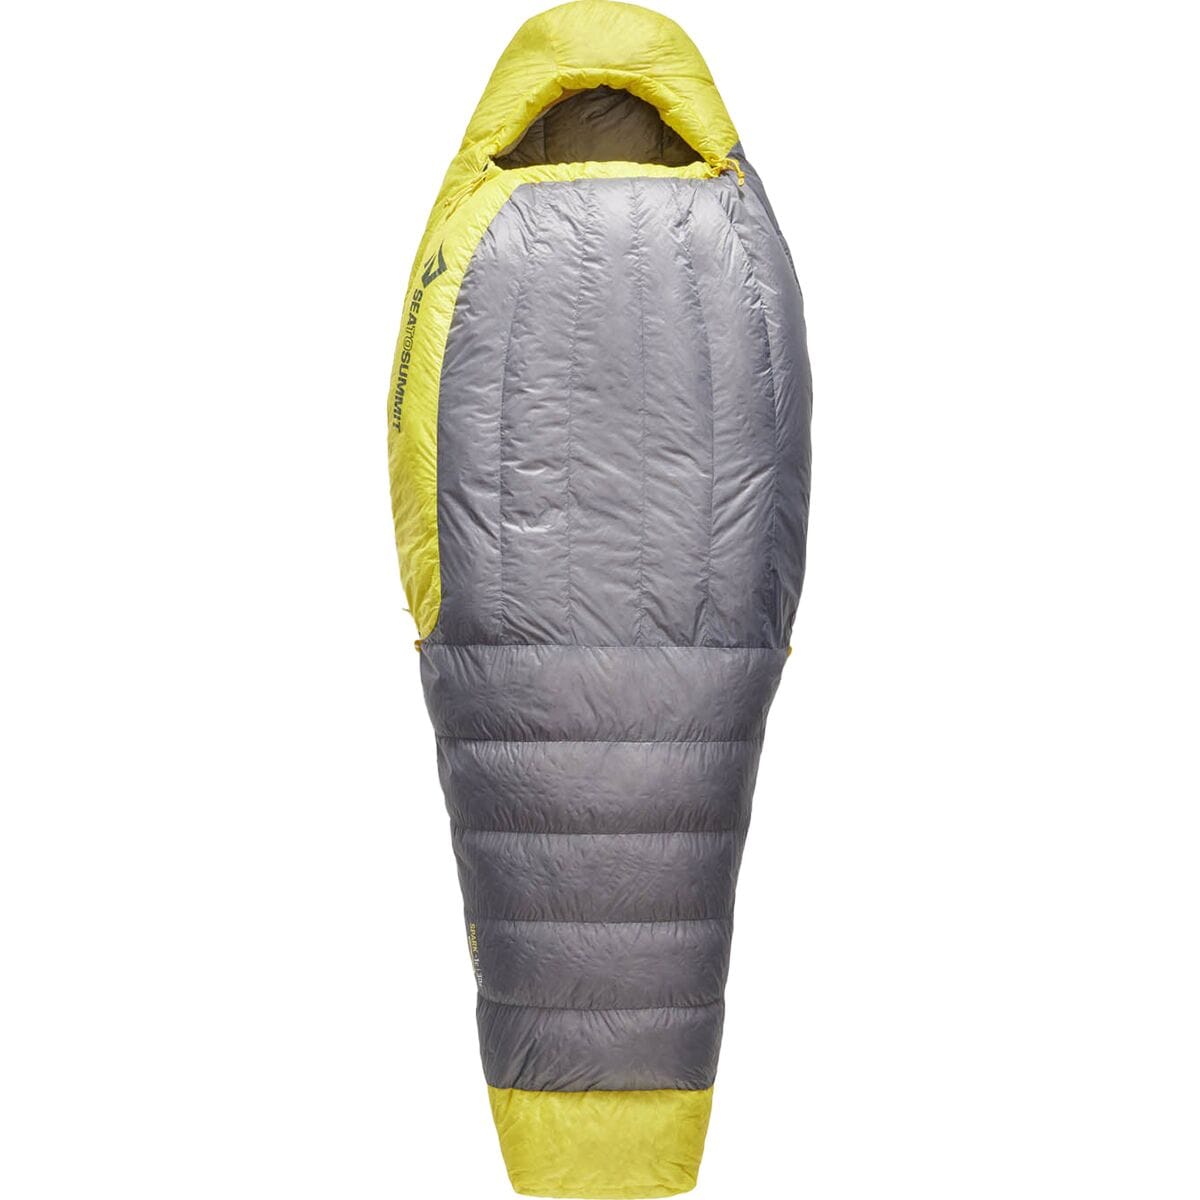 Photos - Suitcase / Backpack Cover Sea To Summit Spark Sleeping Bag: 30F Down - Women's 